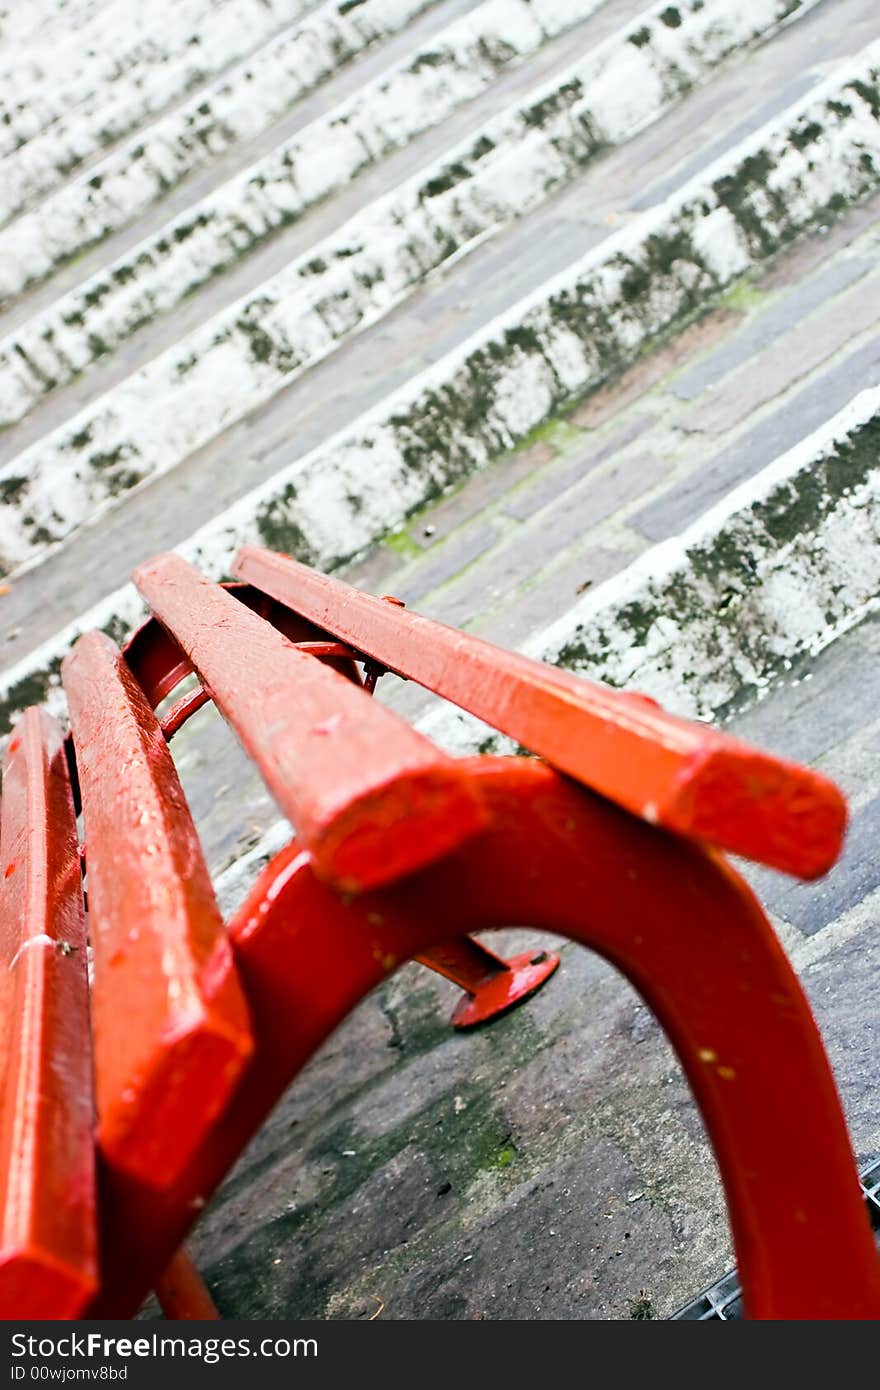 Close up of a red wooden seat with, on the back, old white stairs made of stones. This can be a concept image with the implication of a choice between stay and go. Useful also for relax and rest concept. Focus on the center of the seat. Close up of a red wooden seat with, on the back, old white stairs made of stones. This can be a concept image with the implication of a choice between stay and go. Useful also for relax and rest concept. Focus on the center of the seat.